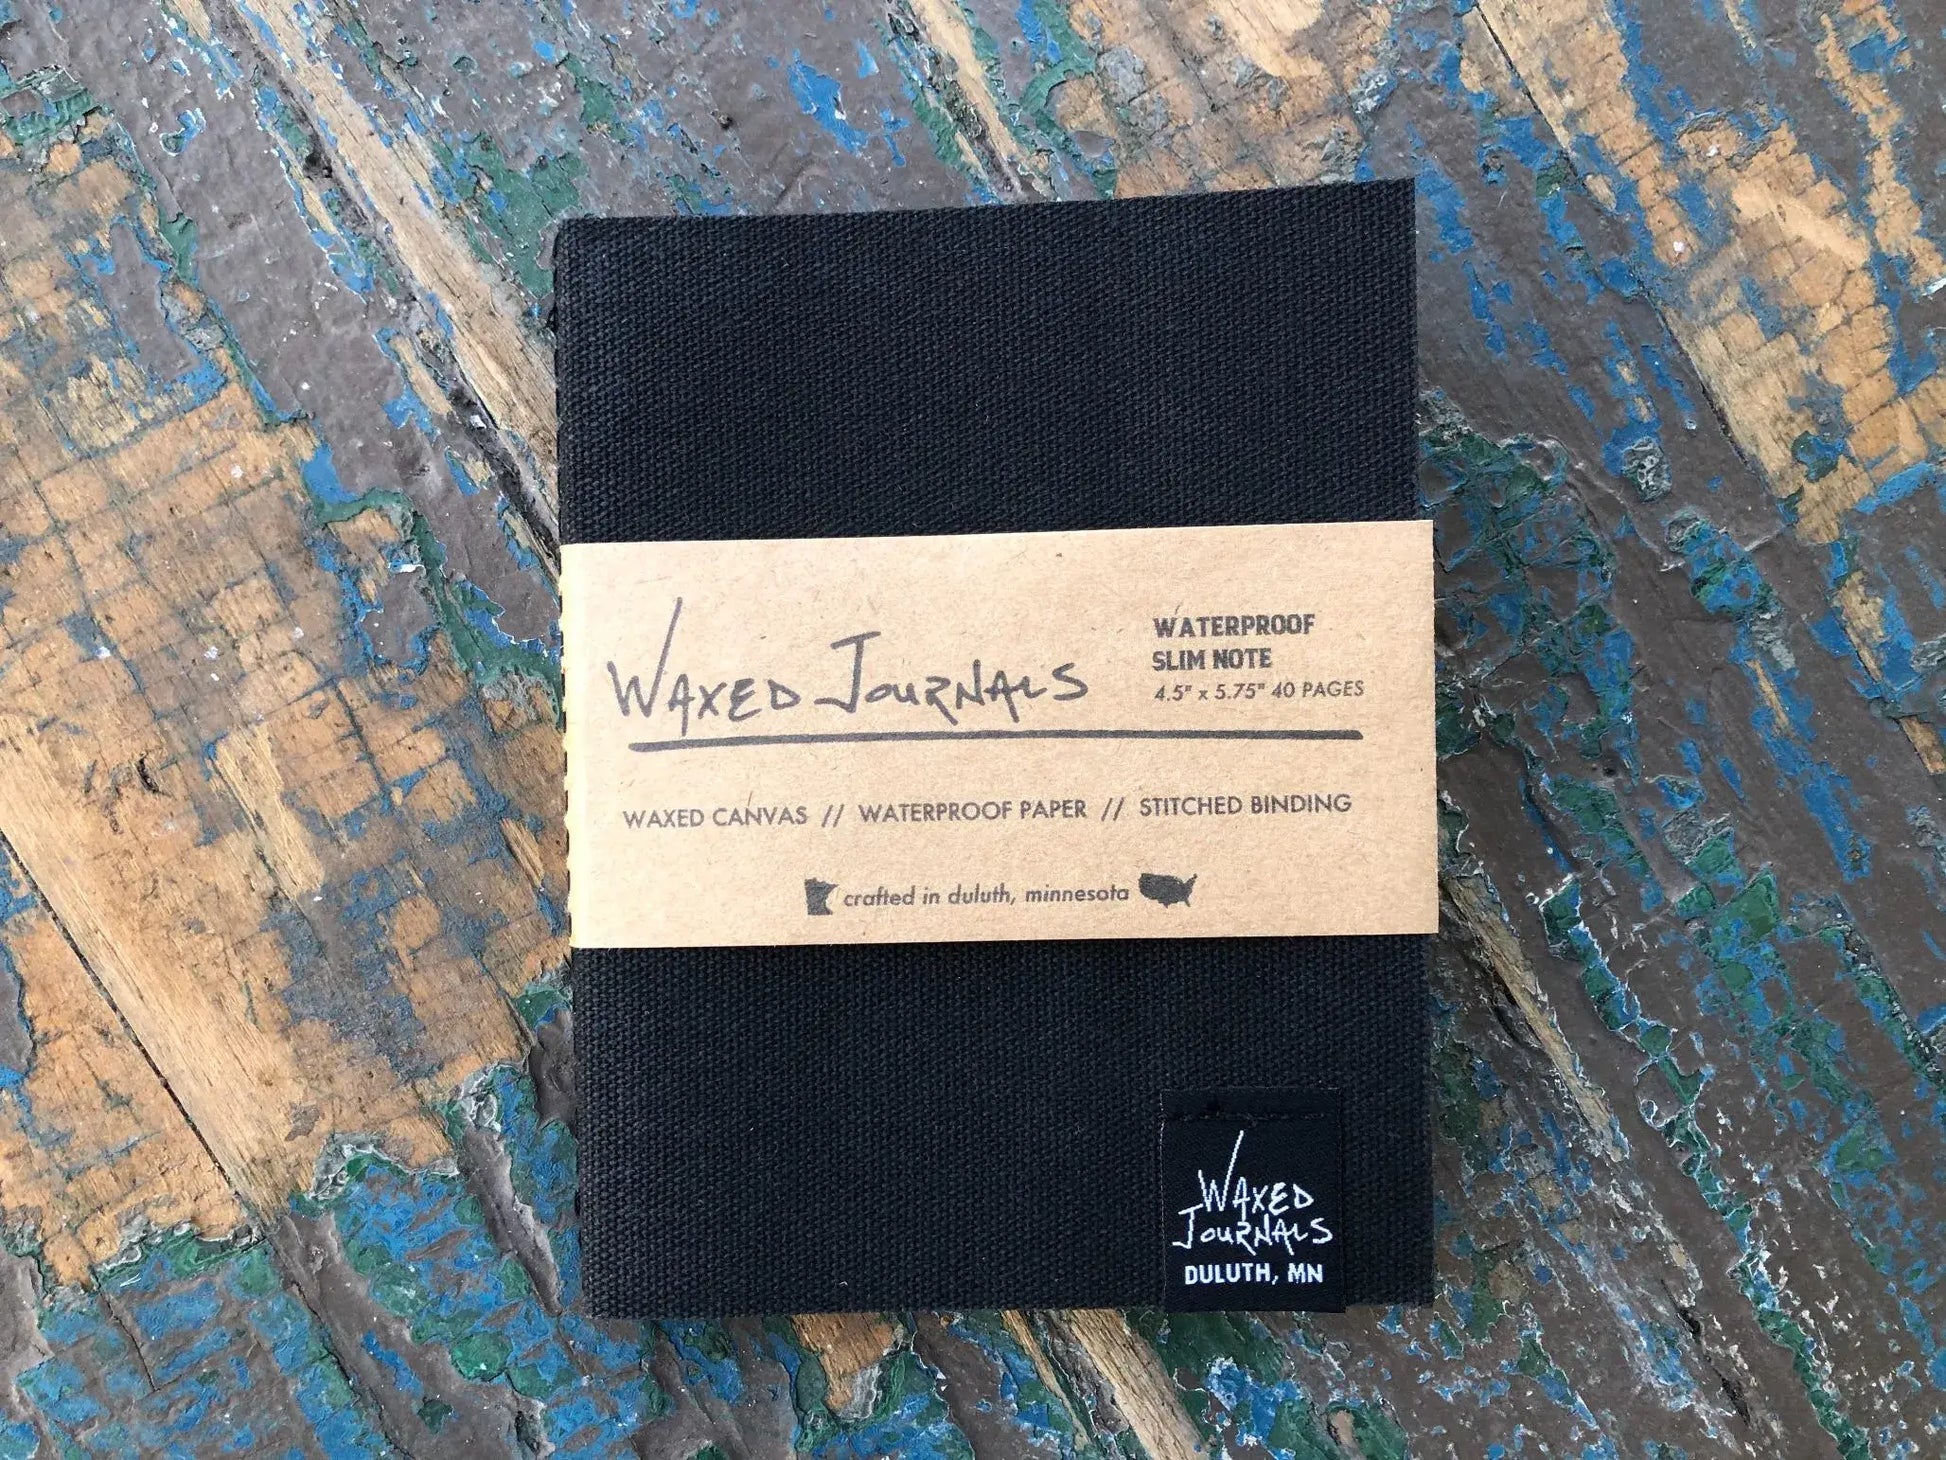 Black waxed journal in packaging on a blue wood table.